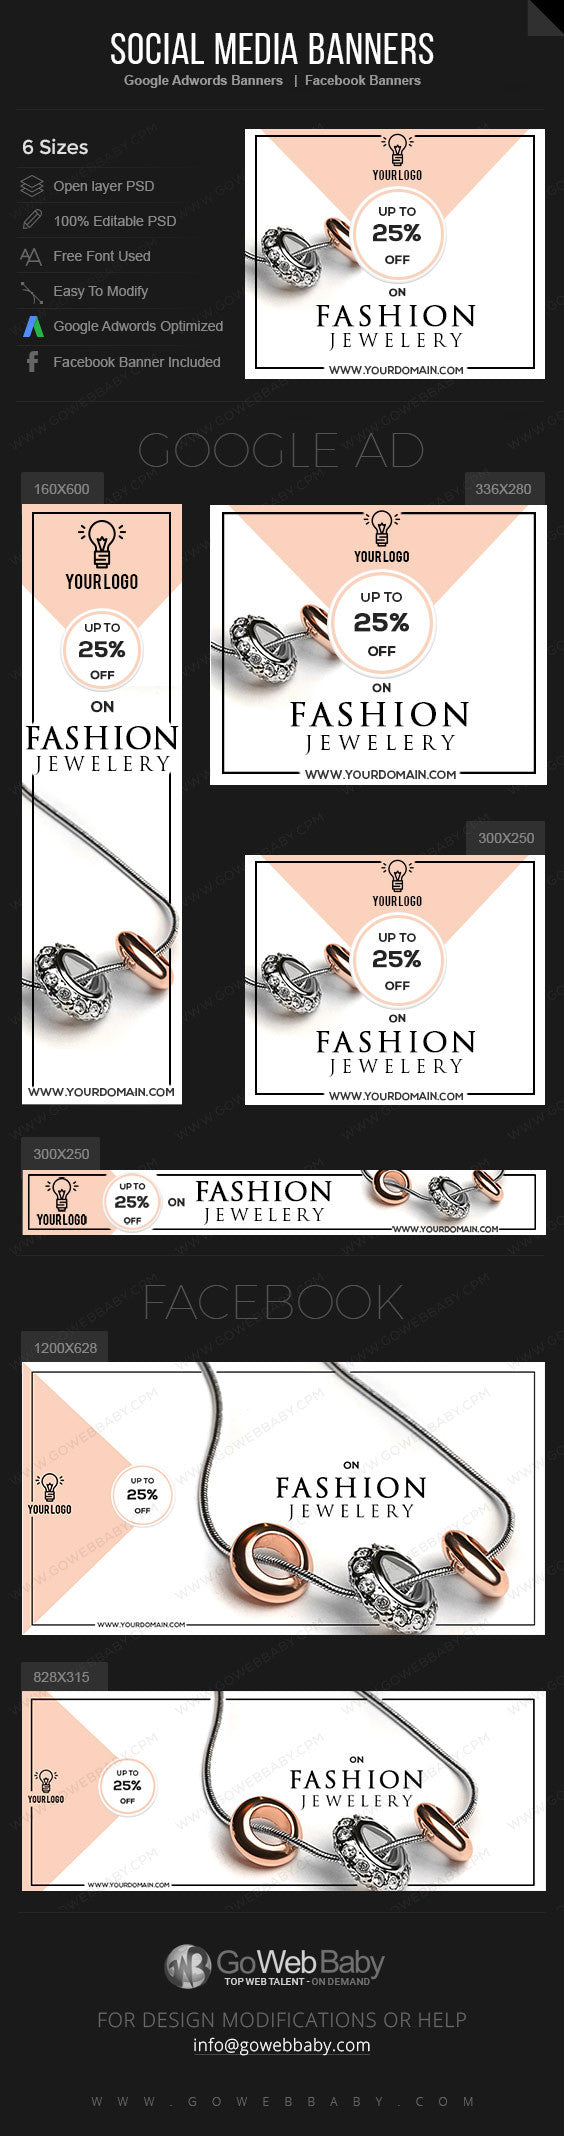 Google Adwords Display Banner with Facebook banners - Fashion Jewelry for Website Marketing - GoWebBaby.Com